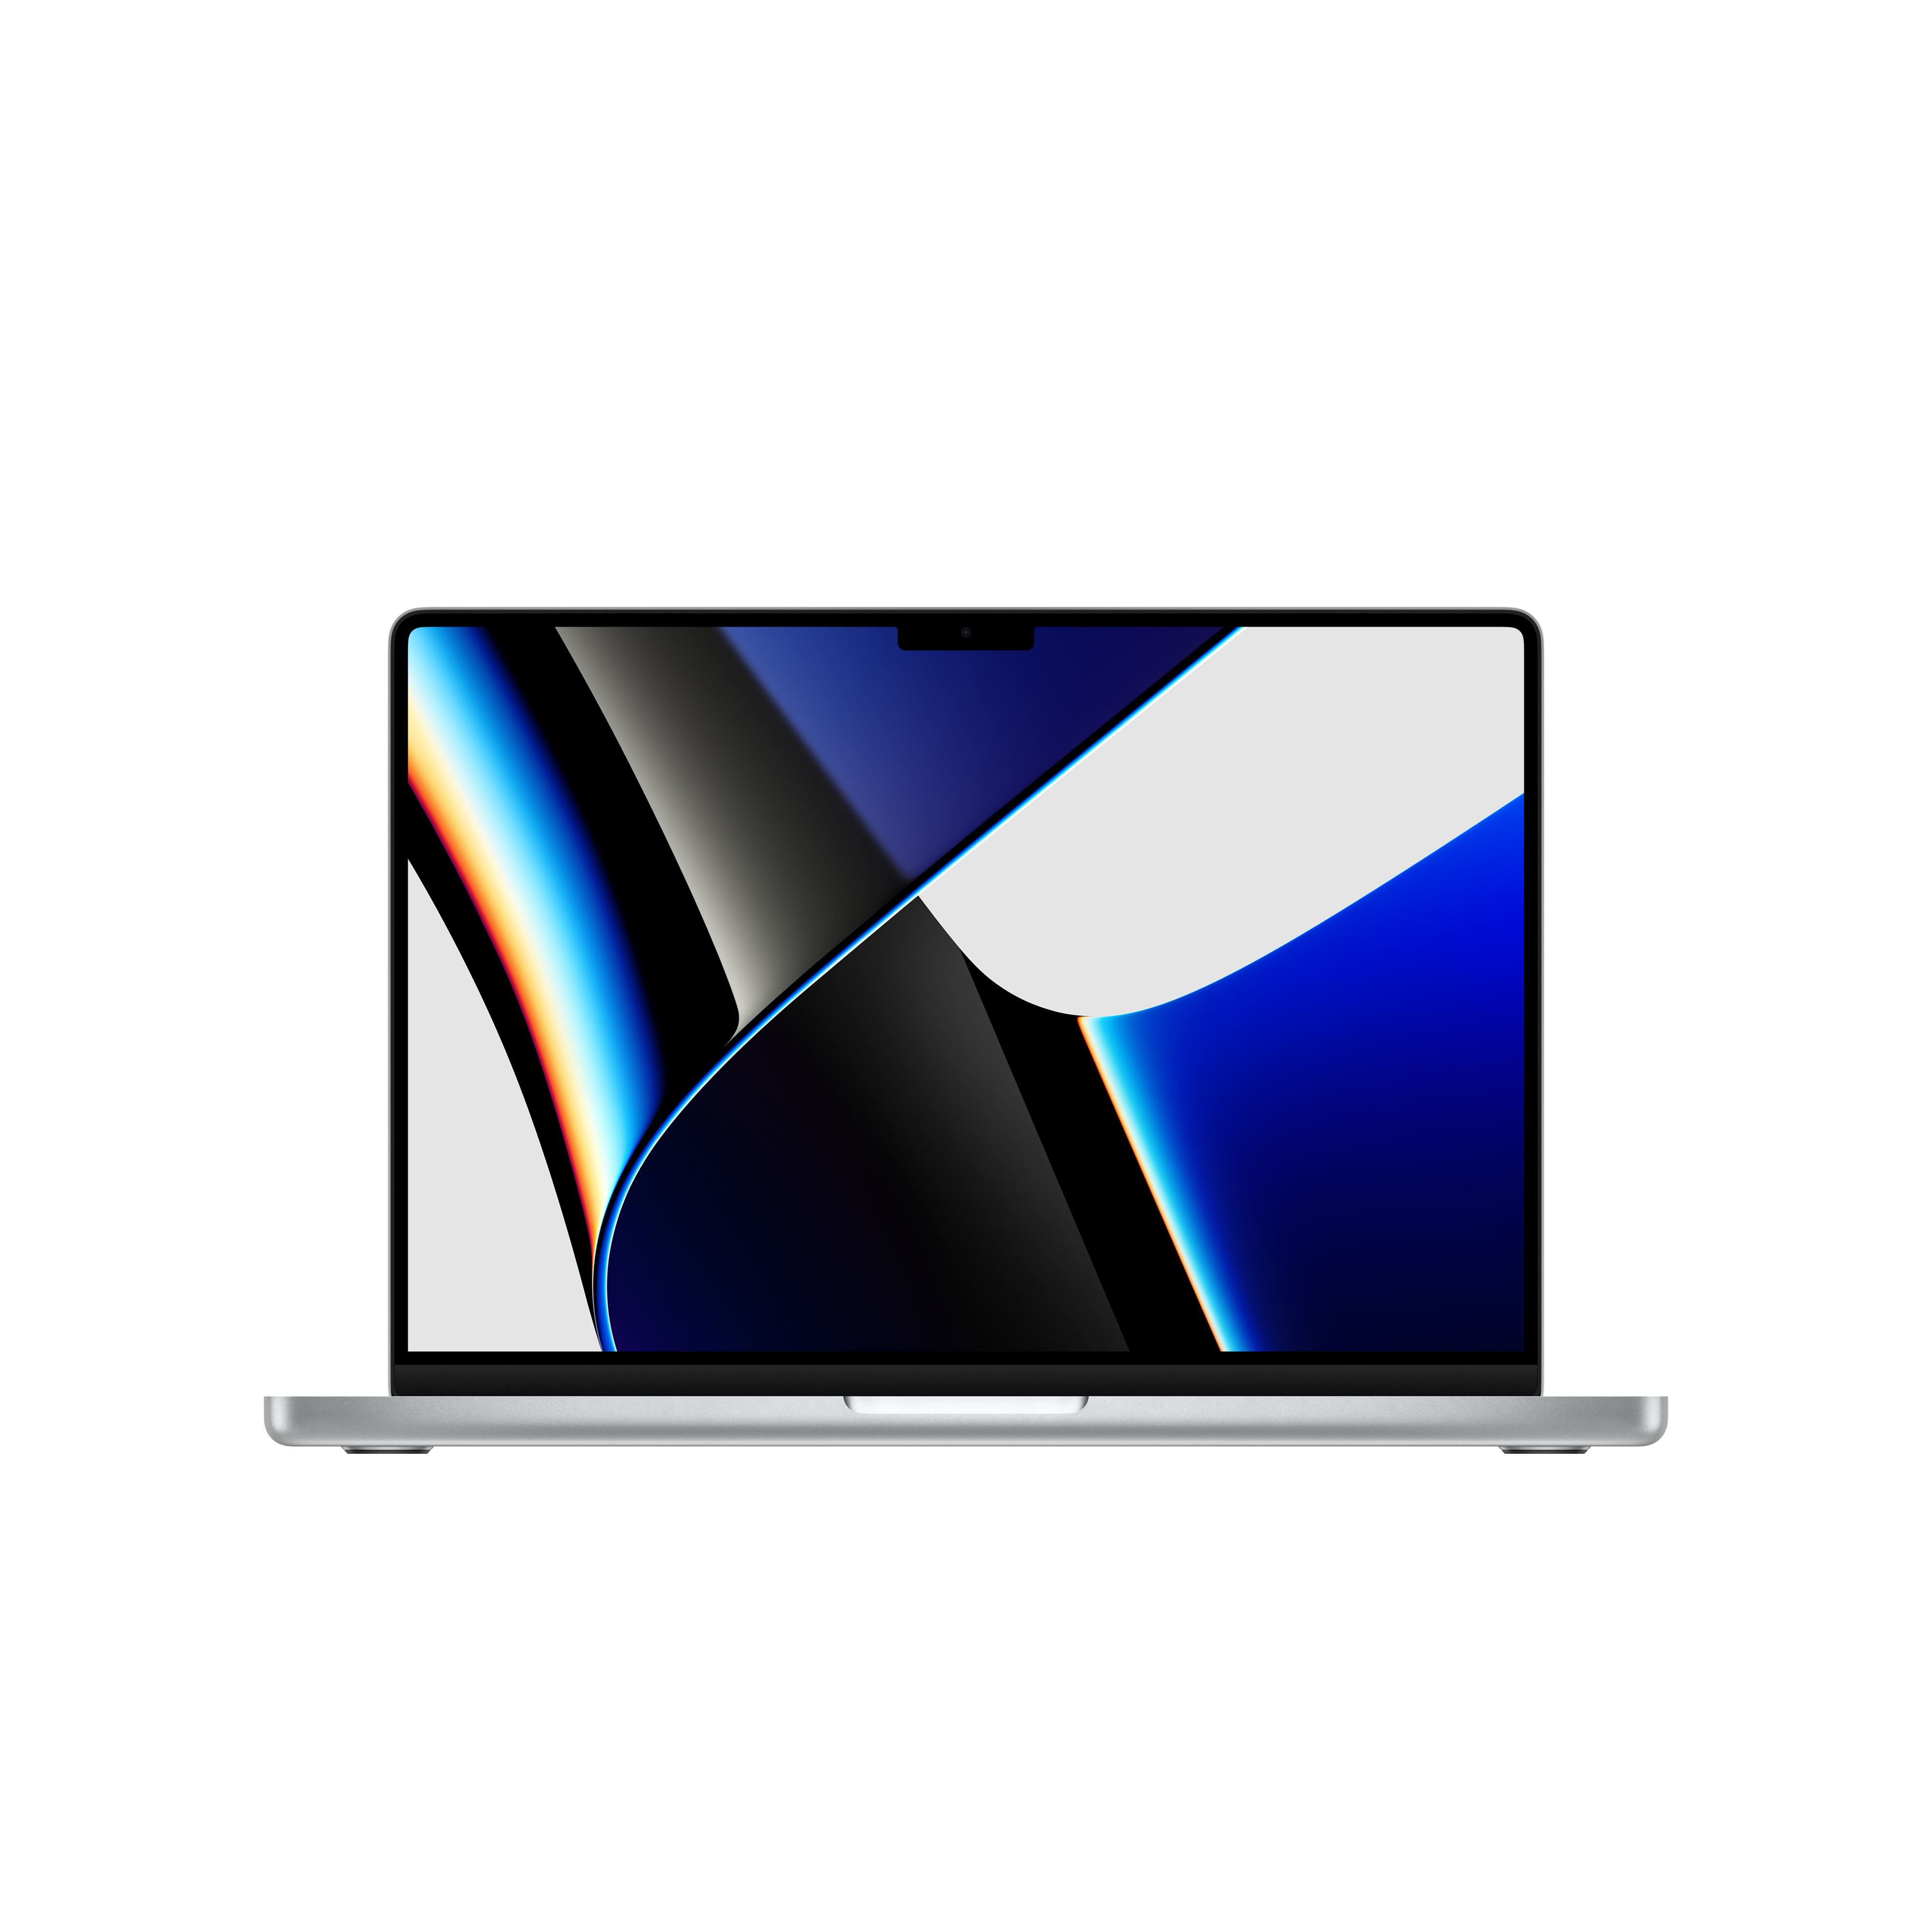  14inch (2021) MacBook Pro  M1 Pro chip with 10-core CPU and 16-core GPU 1TB SSD Silver Qwerty